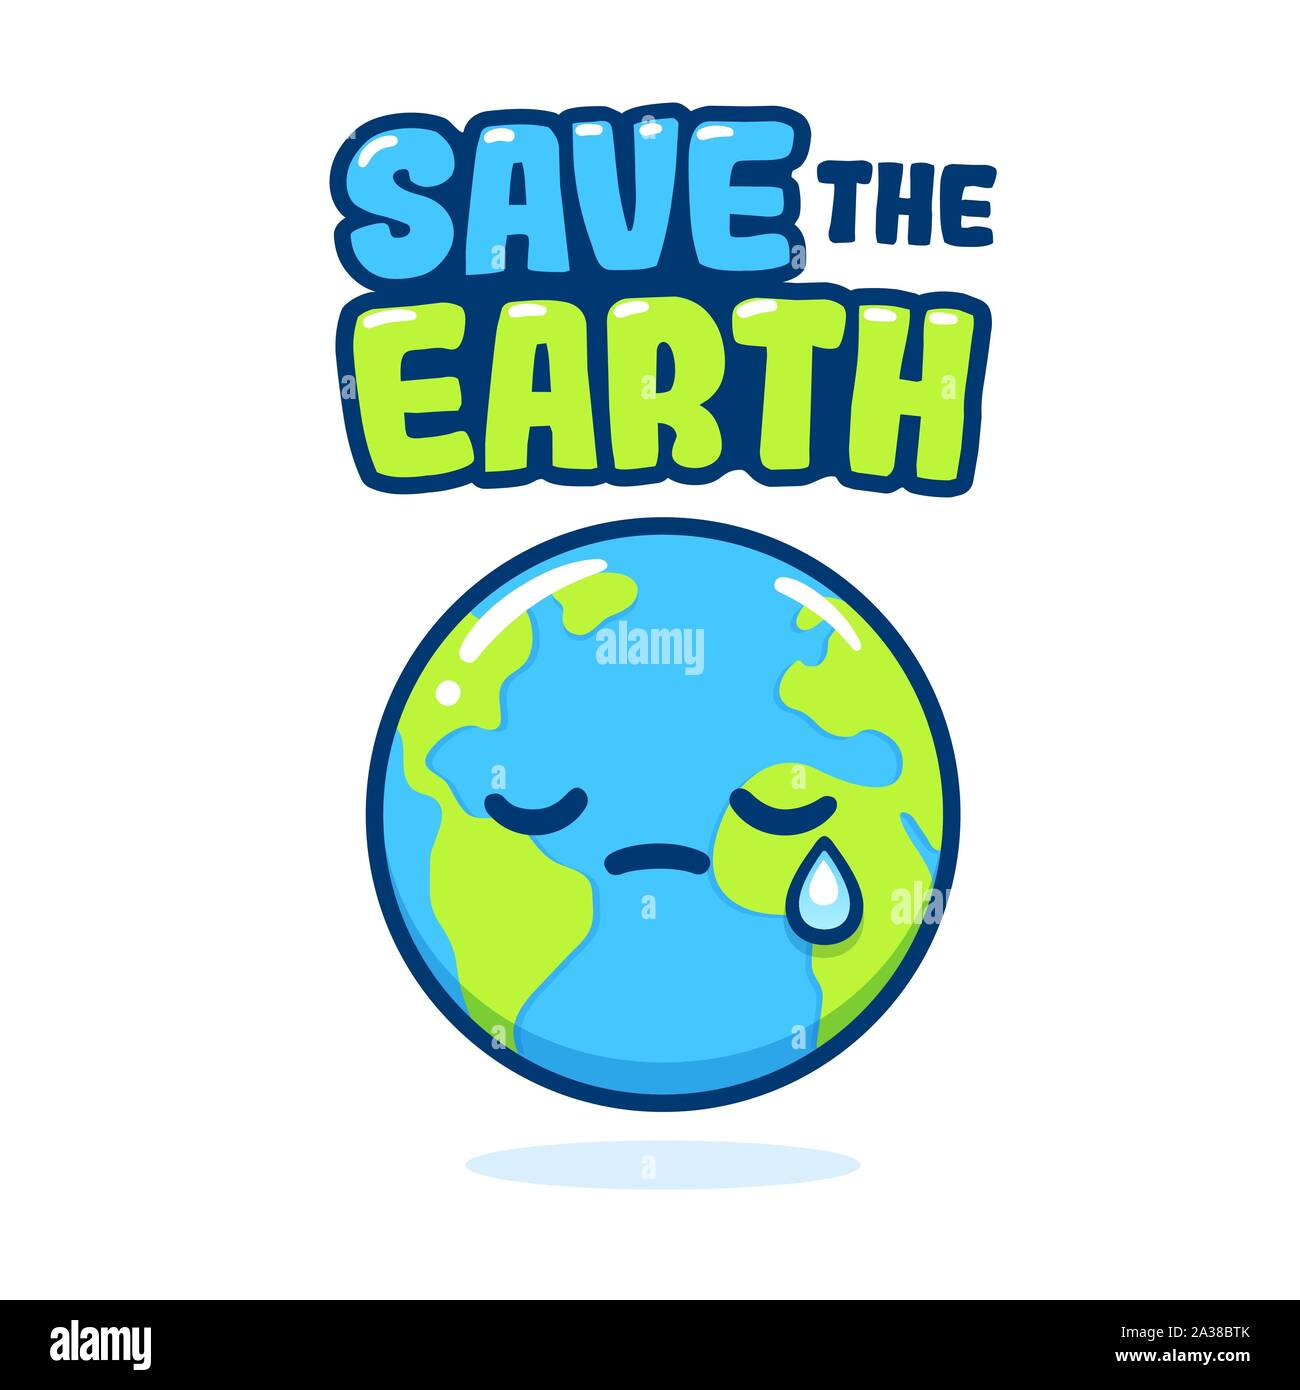 Save the planet, cute hand drawn eco activism poster. Cartoon Earth drawing with crying face. Earth Day vector clip art illustration. Stock Vector